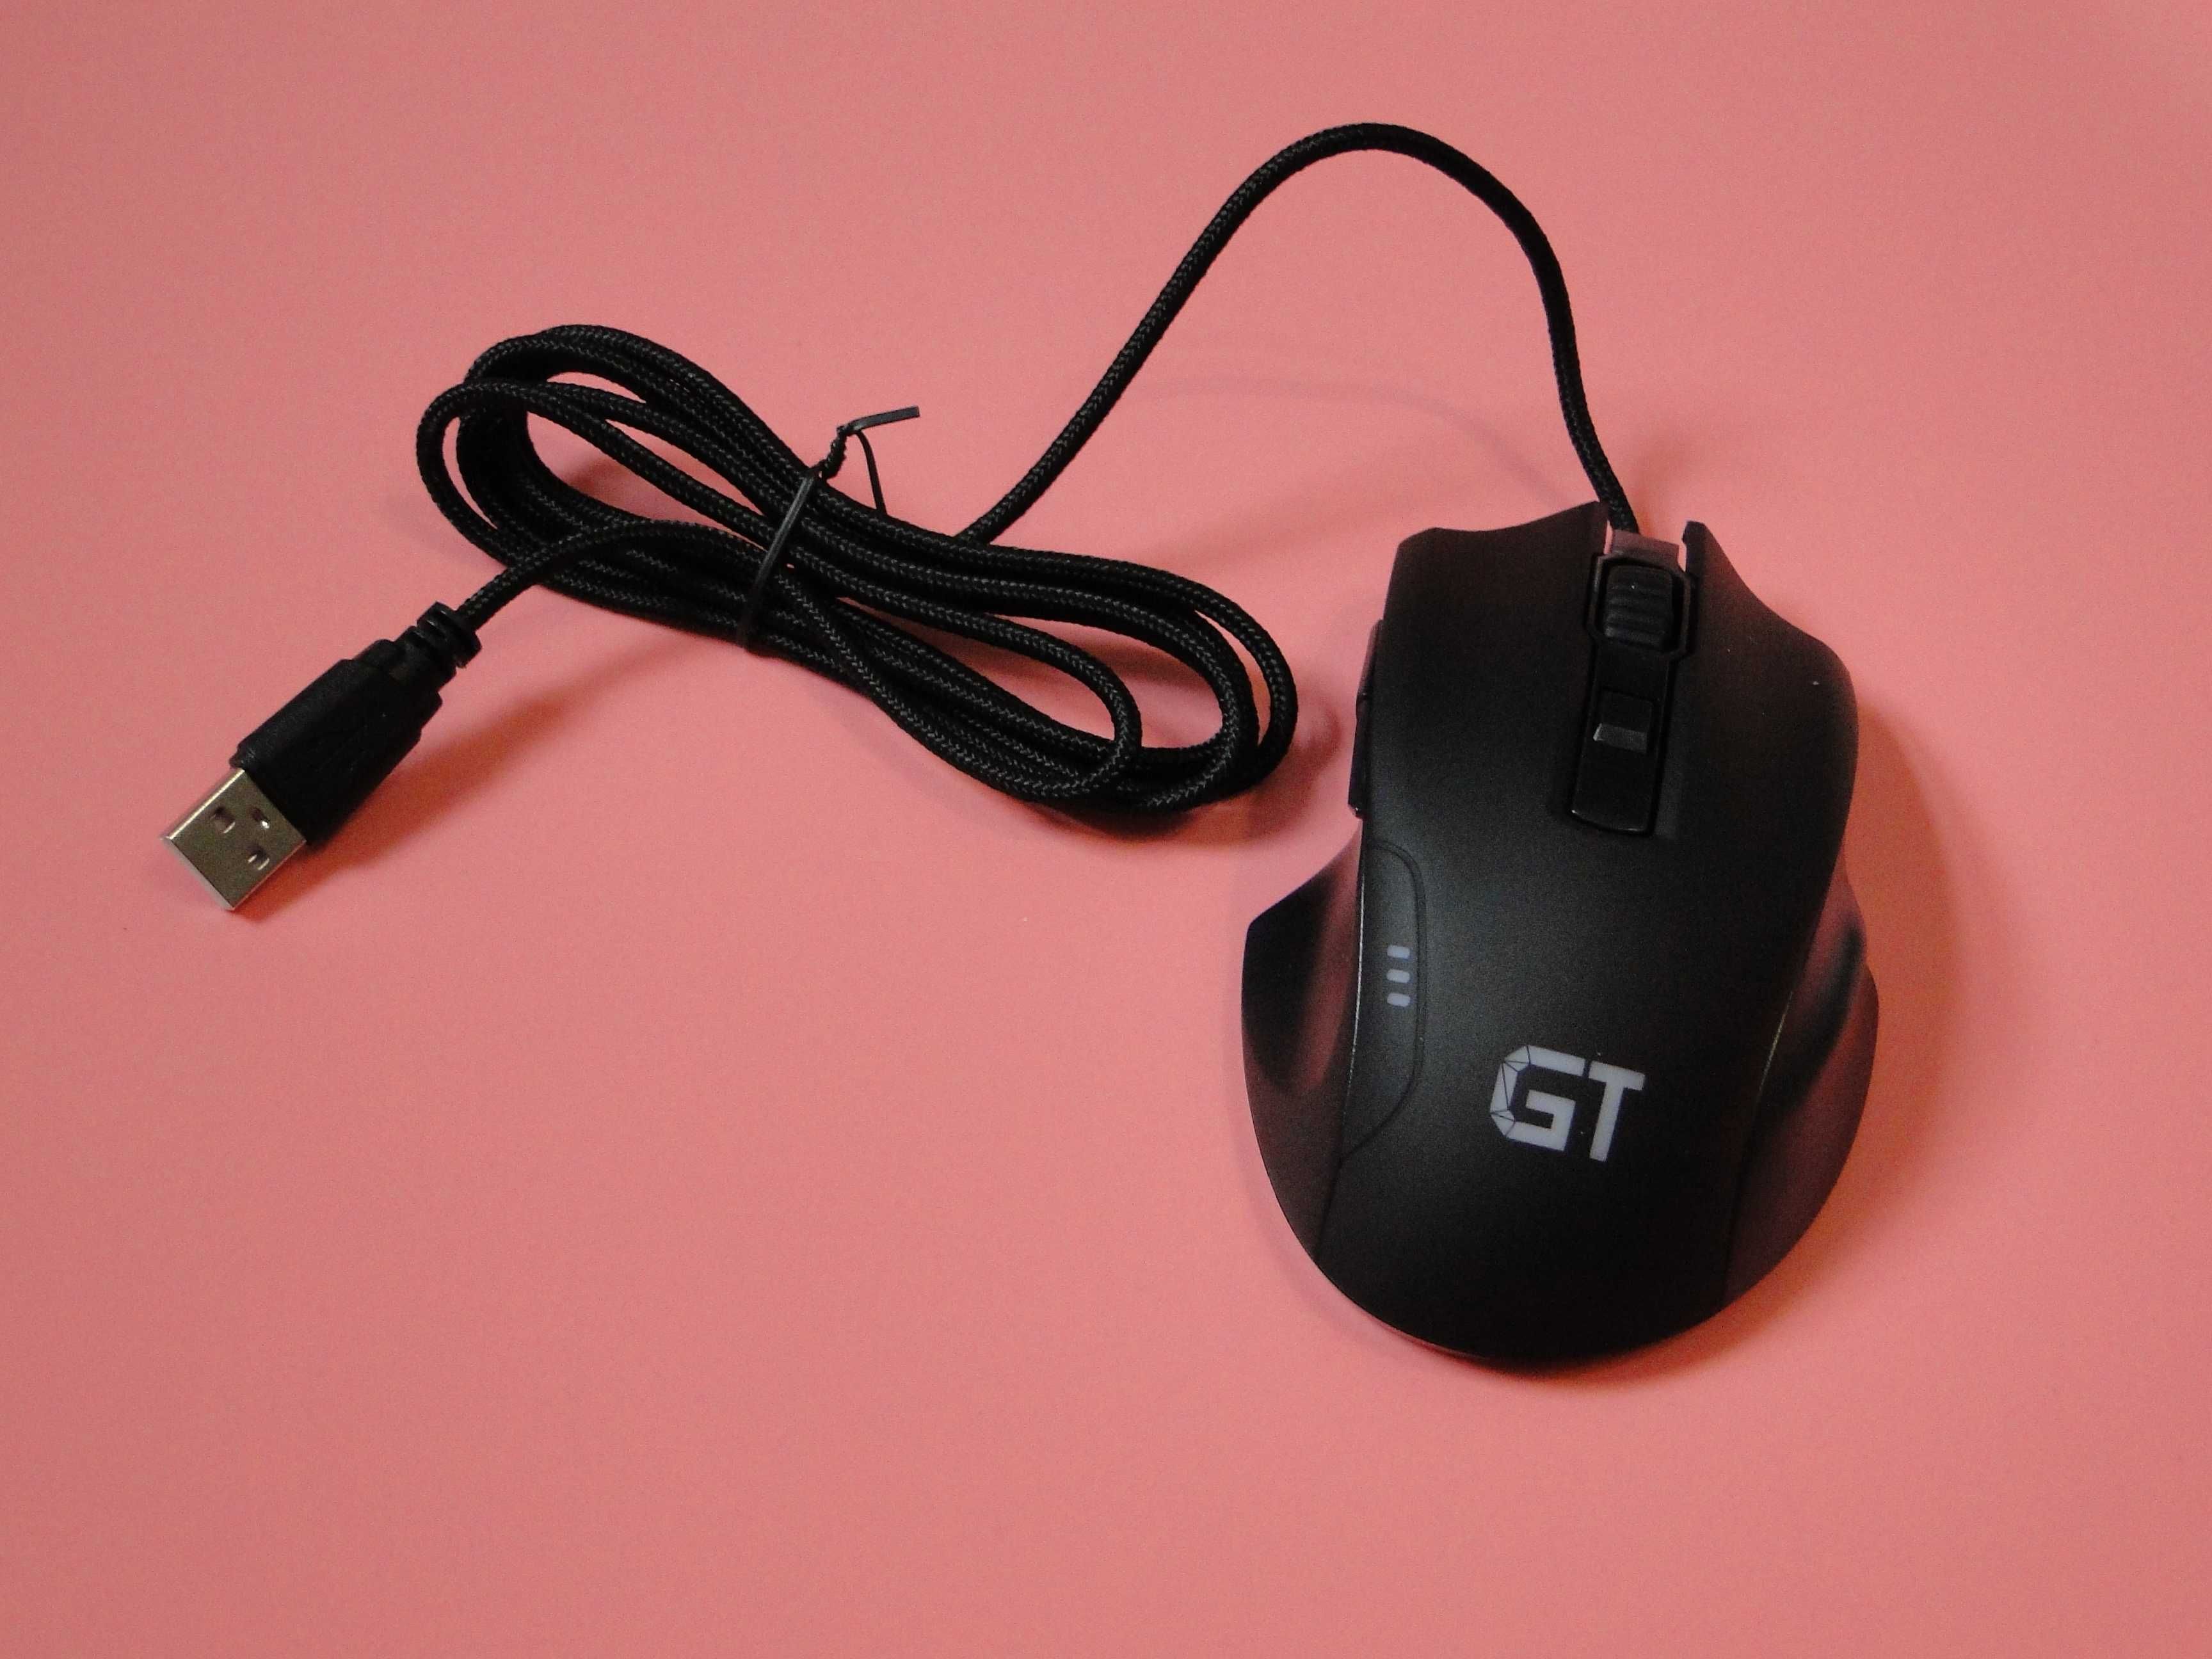 Myszka RaceGT Wired RGB Gaming Mouse